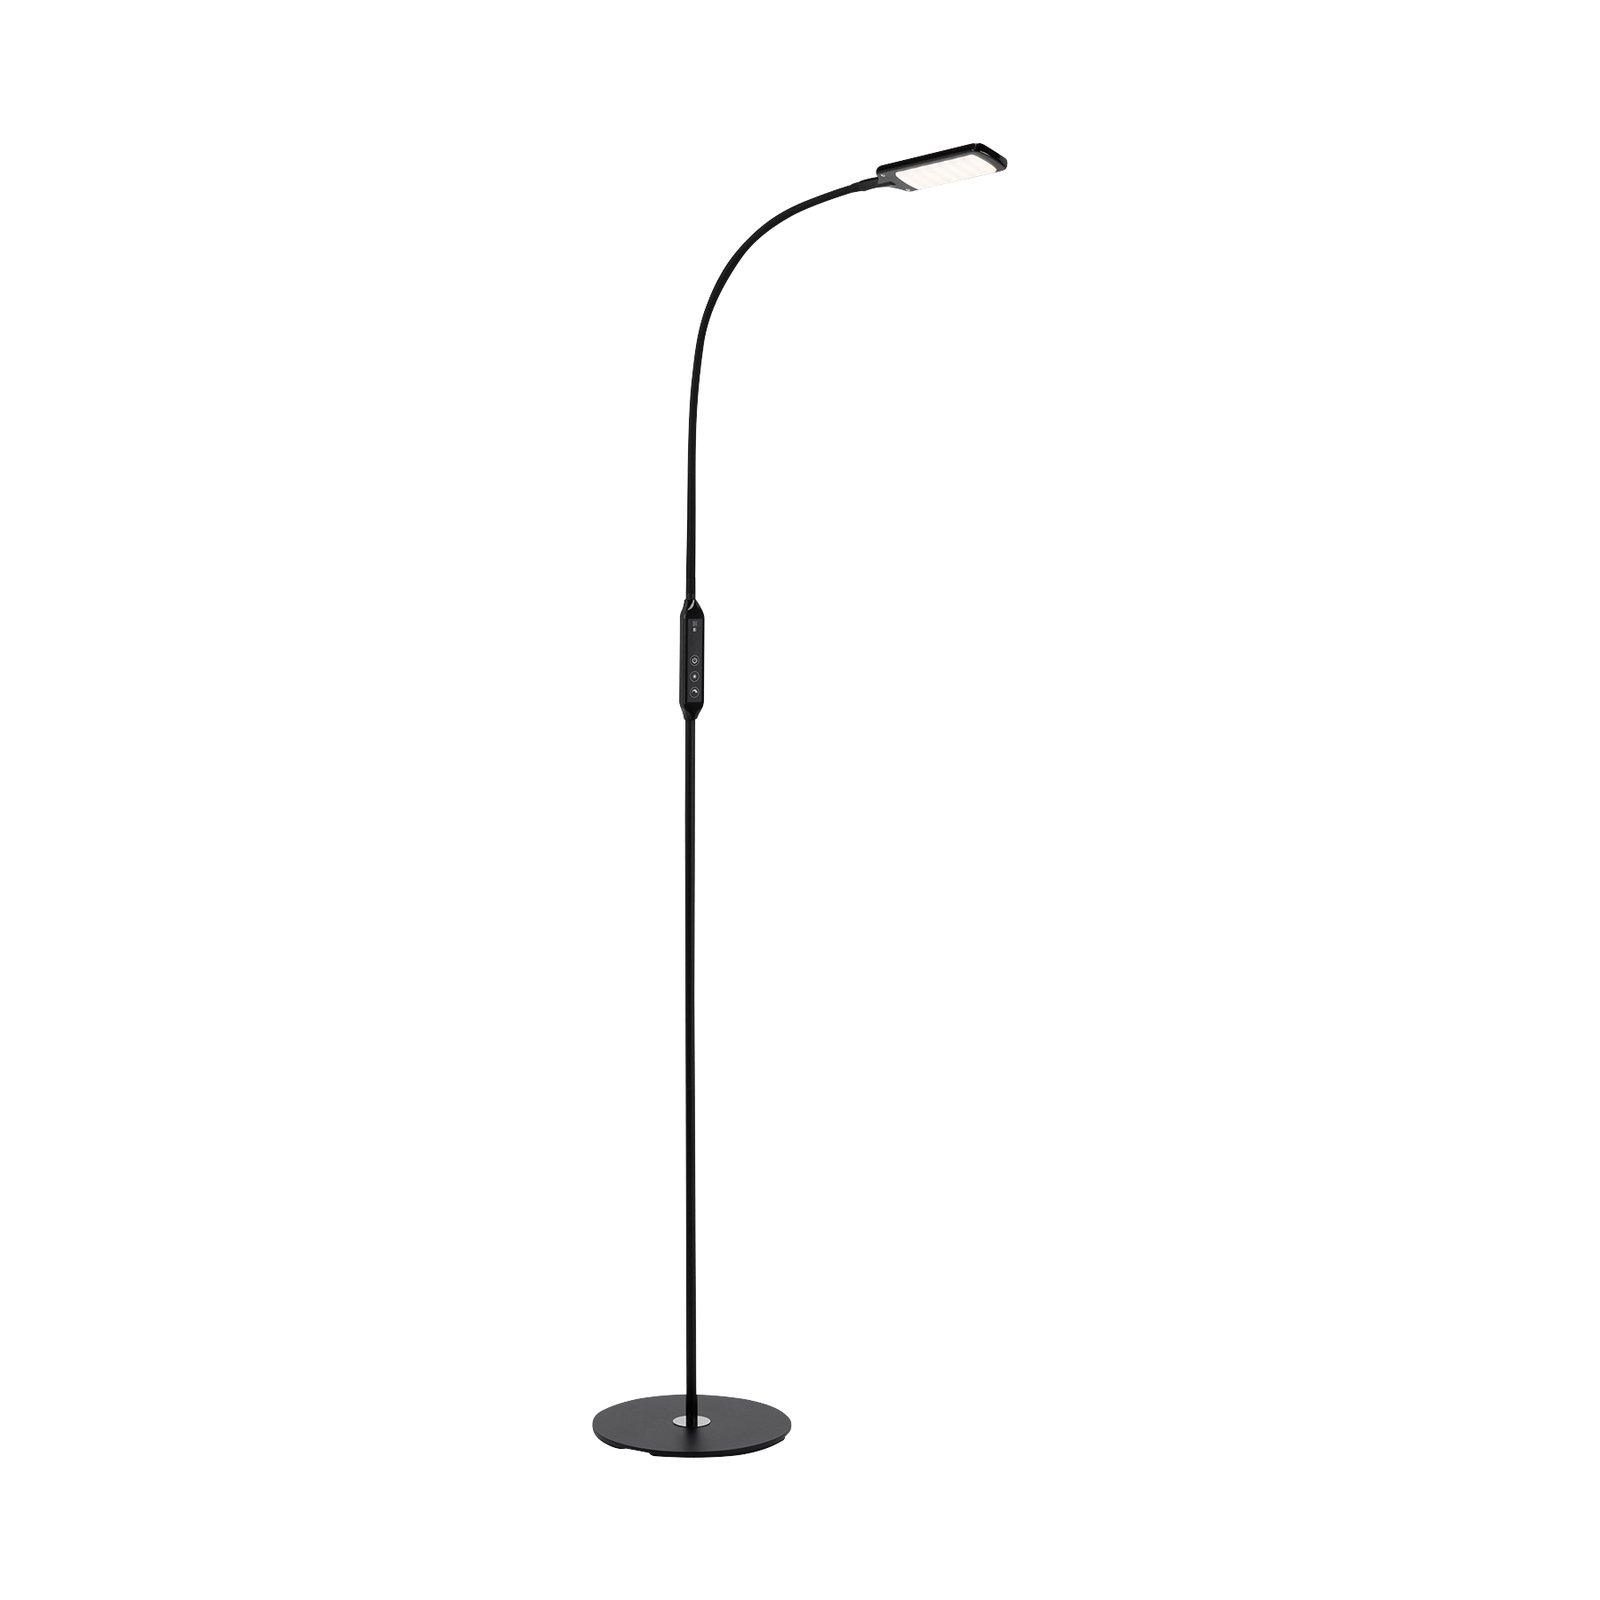 LED floor lamp 1296-015, black, dimmable, CCT